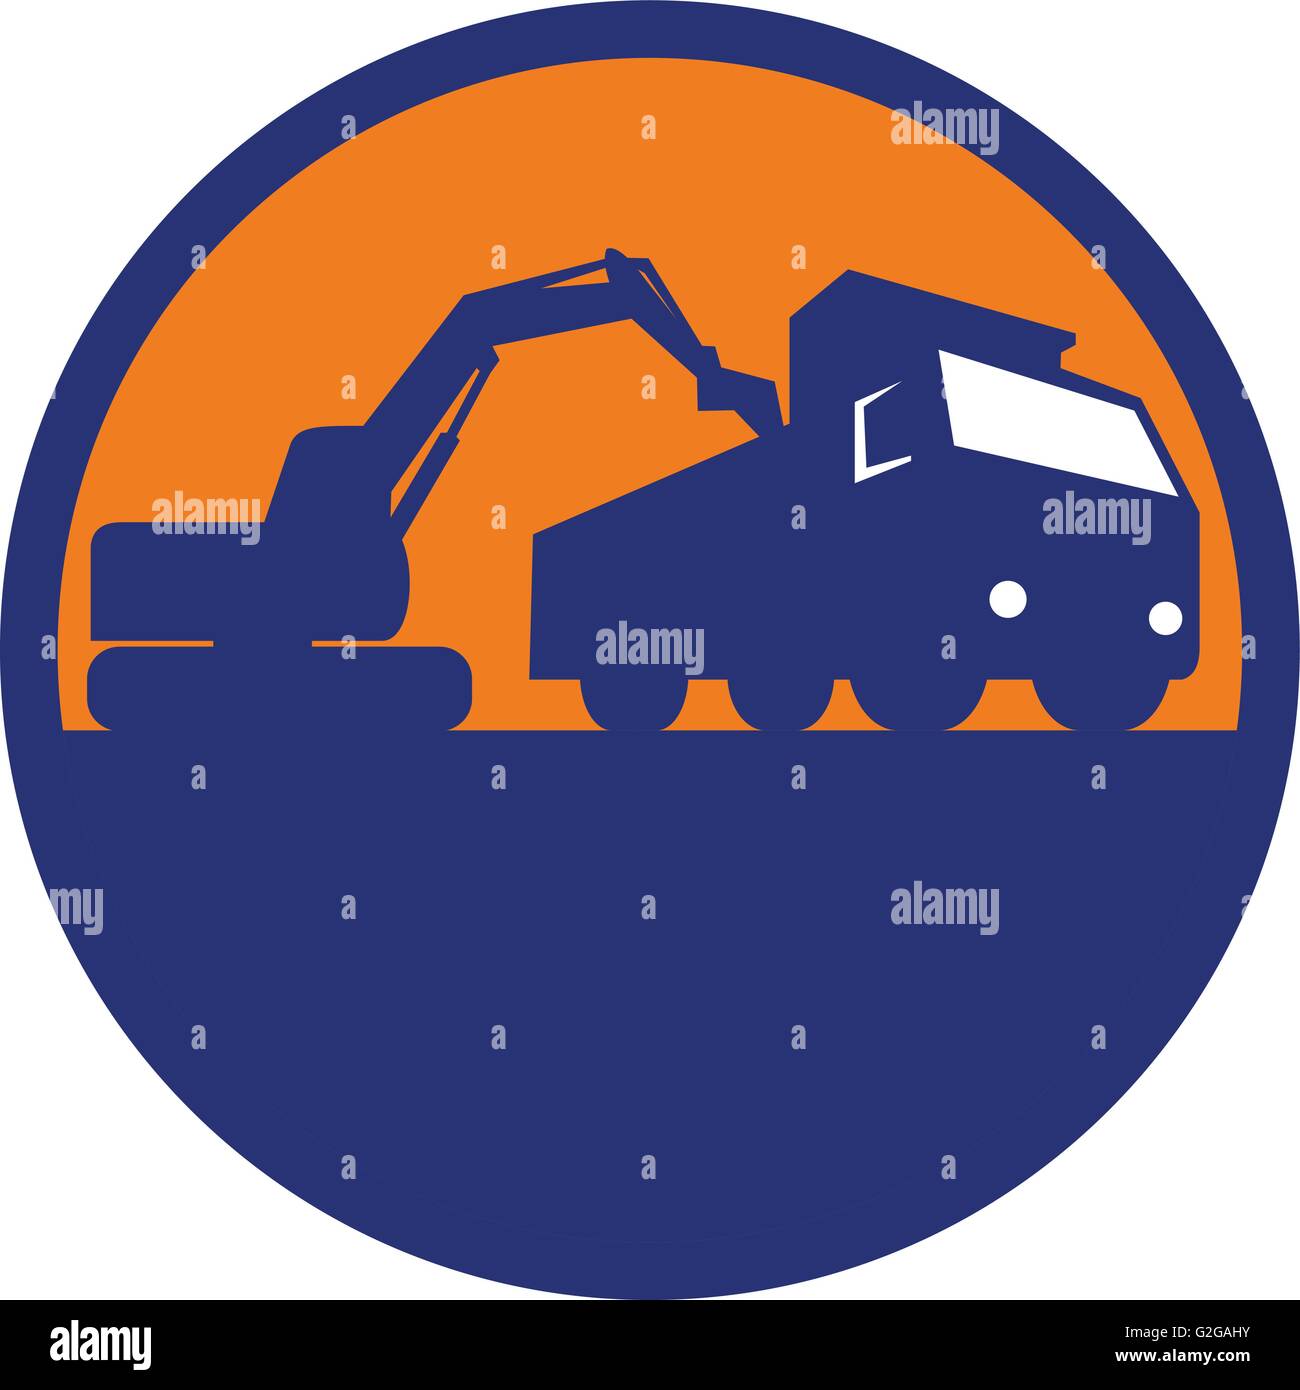 Illustration of a mechanical digger excavator earthmover loading a dump truck viewed from low angle set inside circle done in retro style, Stock Vector